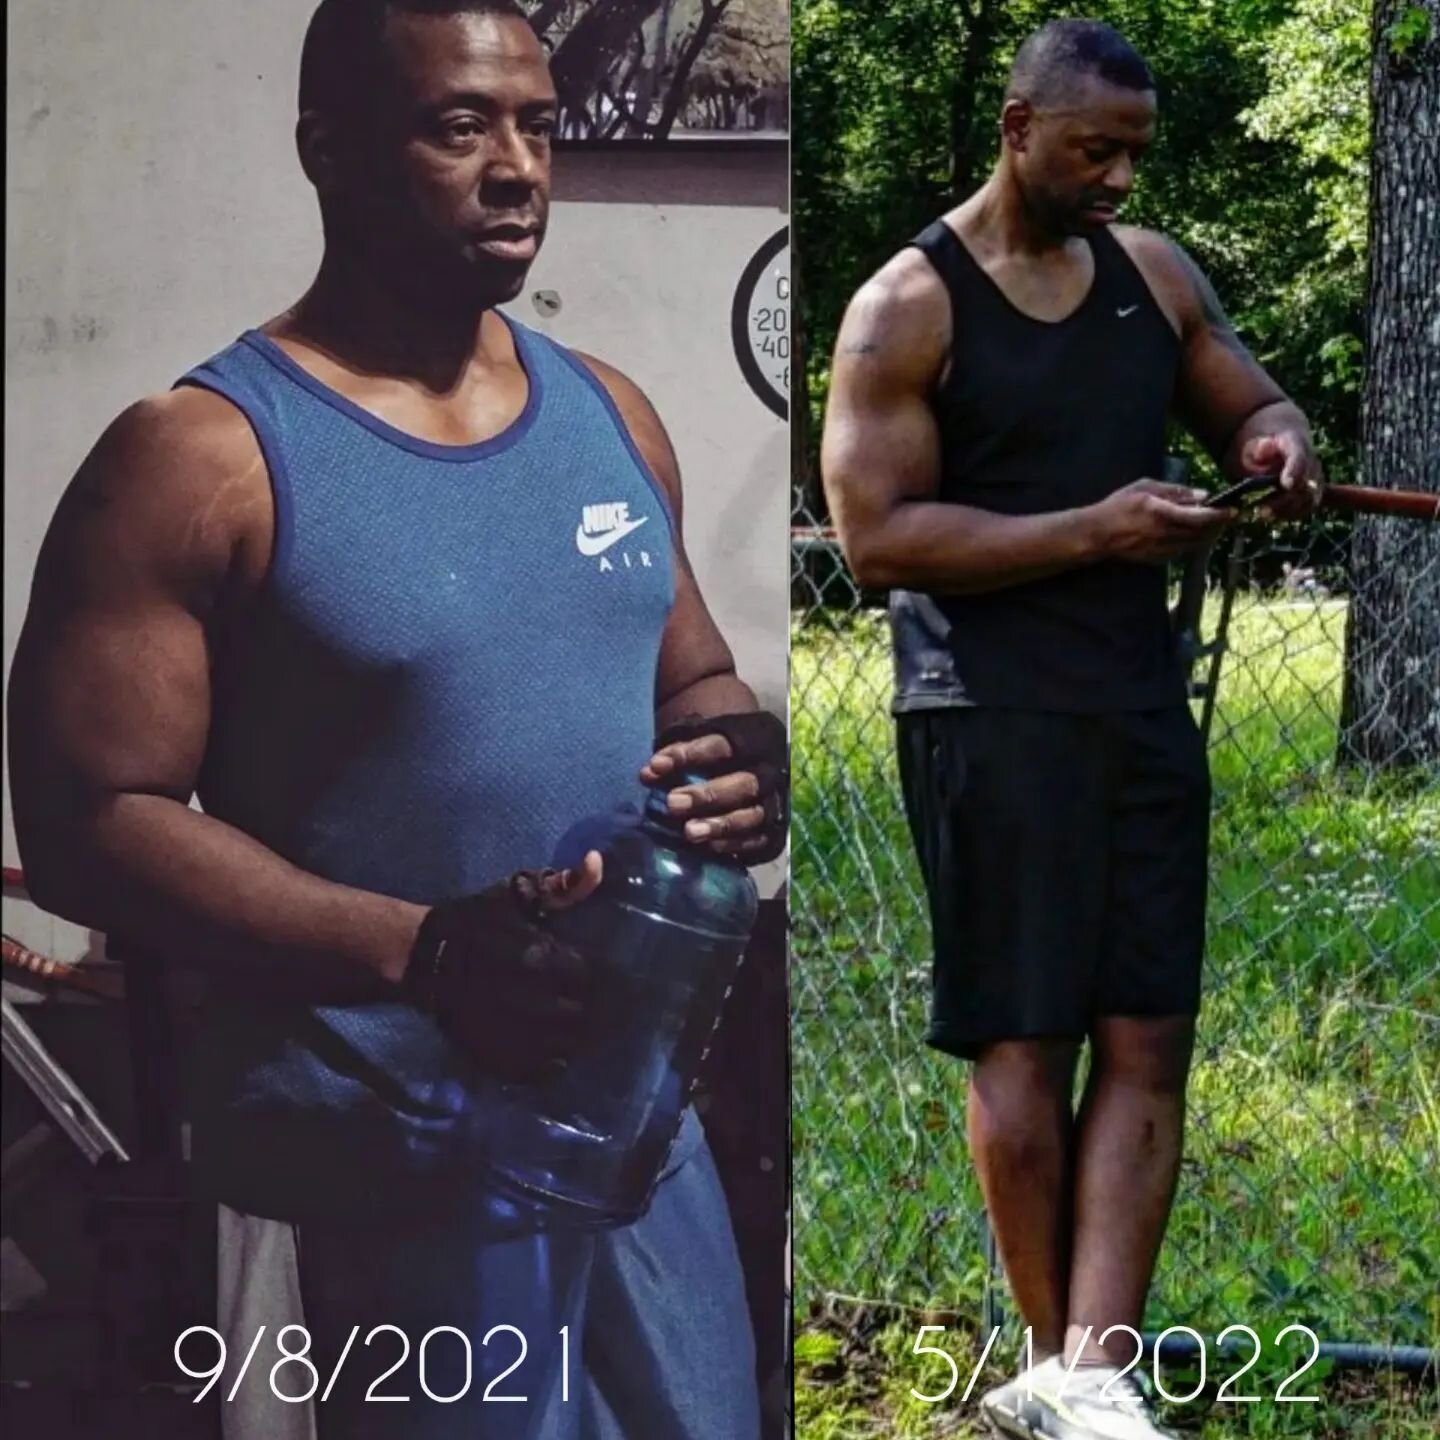 We're not done.  Just getting started. 🙏🏿 #WeightLoss #WeightLossJourney #WeightTraining #WeightLifting #Health #PhysicalHealth #MentalHealth #Strength #MentalStrength #StrengthOfMind #Gym #HomeGym #Iron #Life